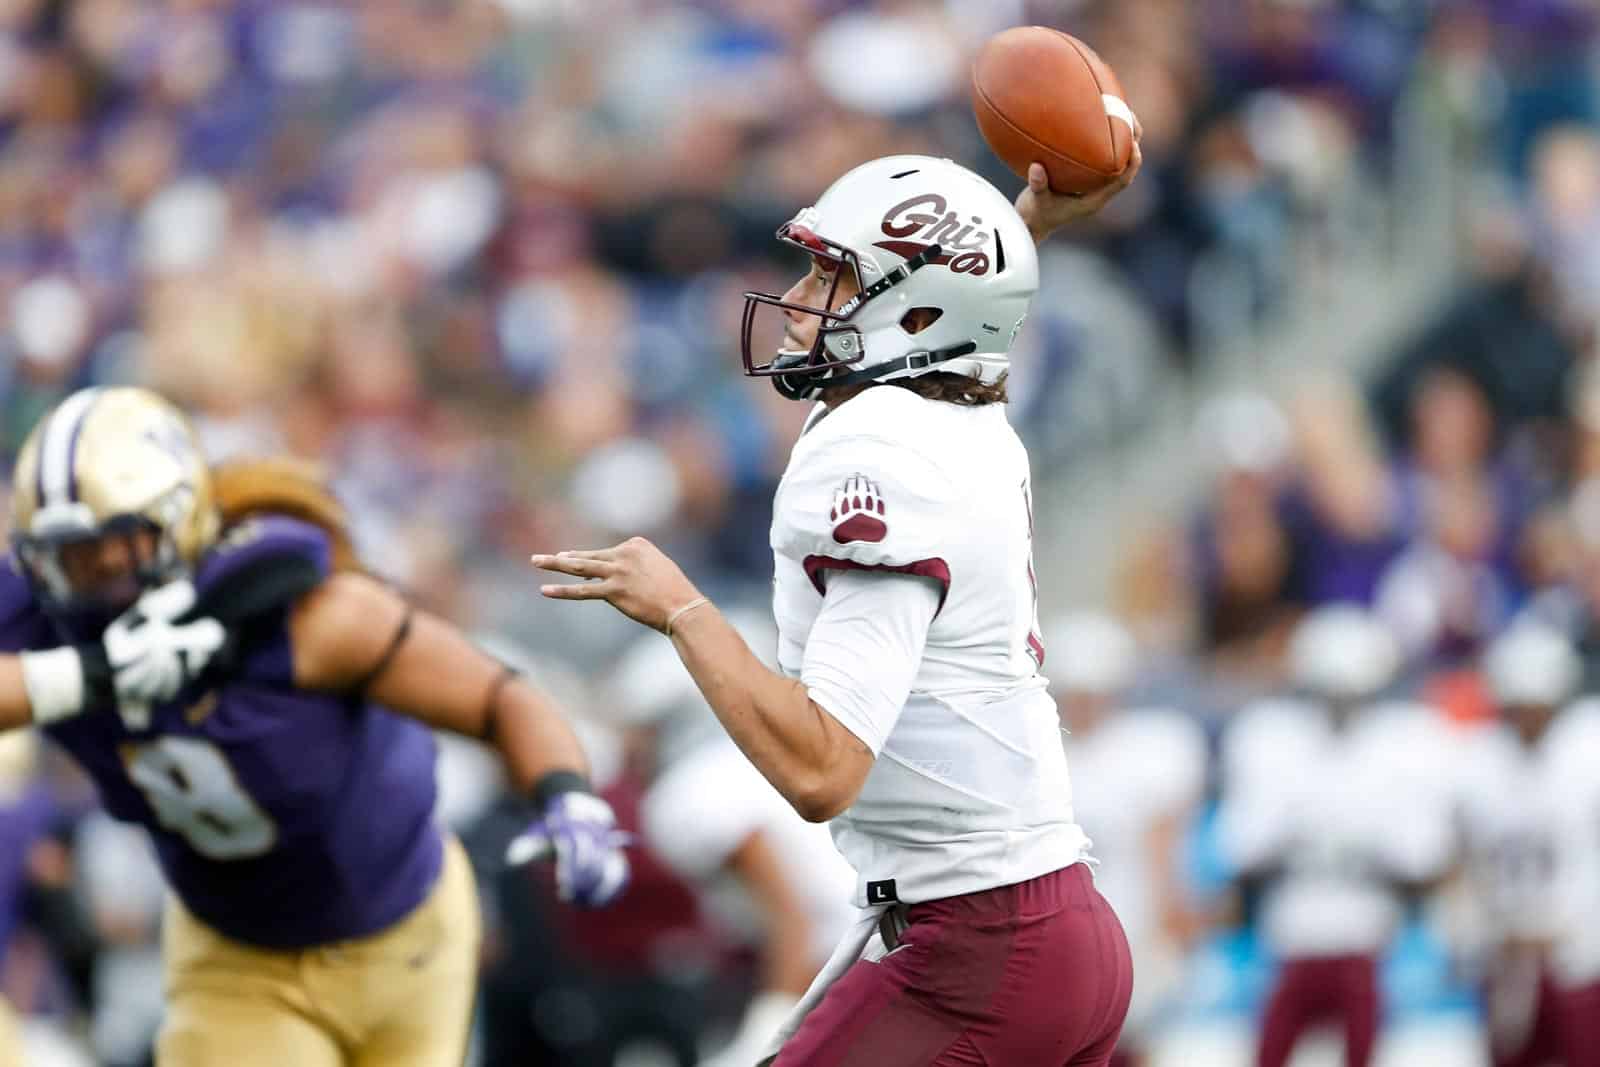 Montana Football Schedule 2022 Montana Adds Northwestern State, Completes 2022 Football Schedule